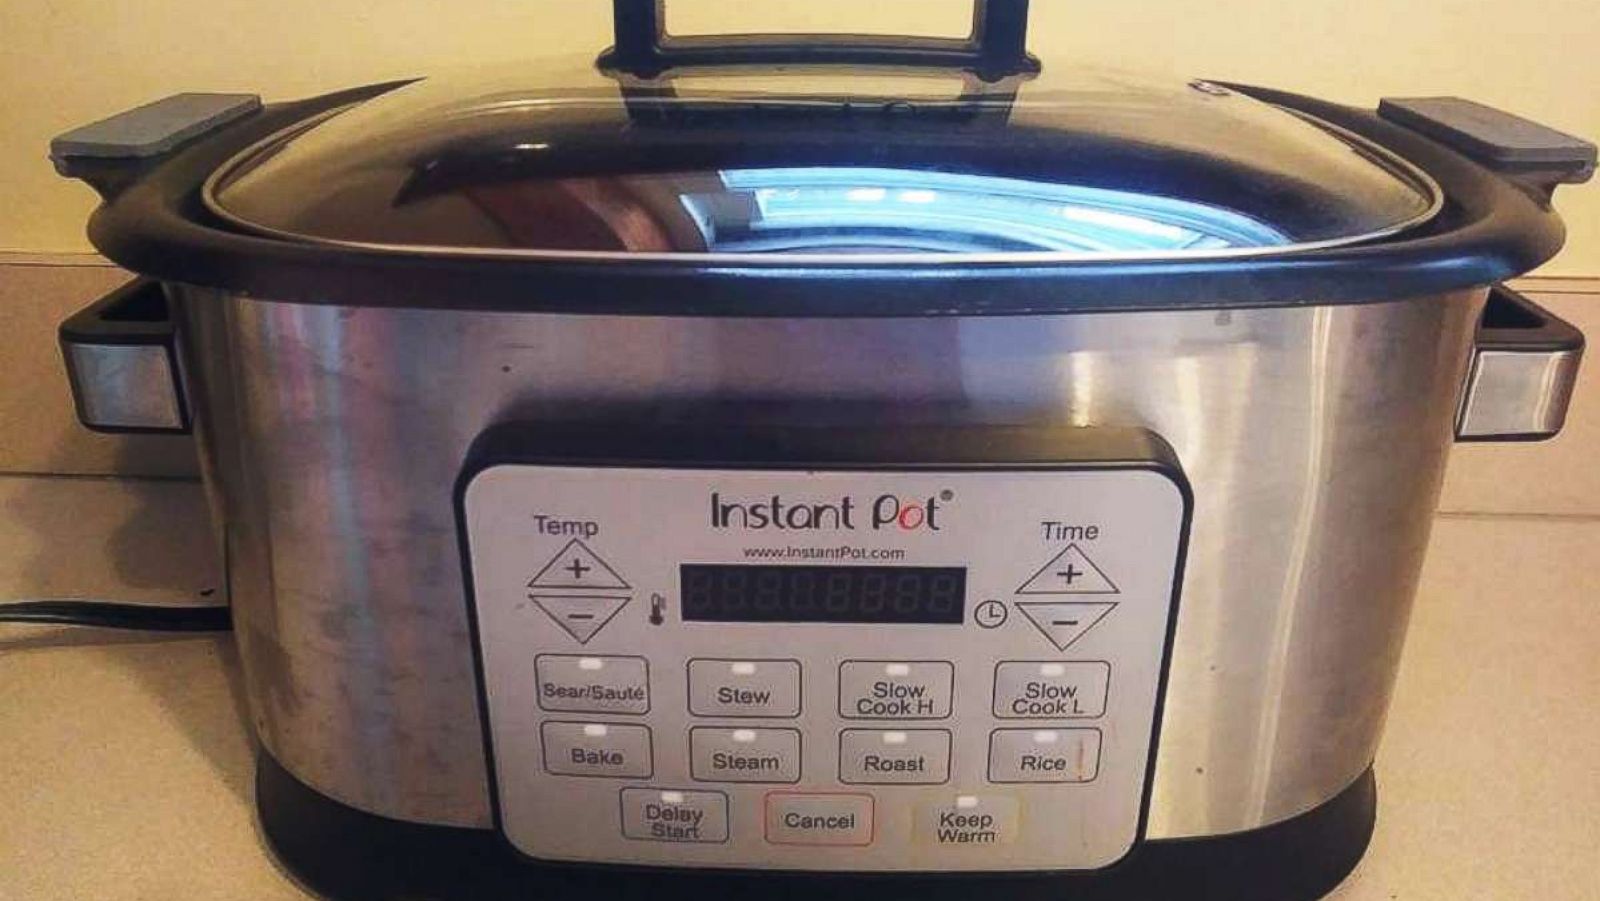 PHOTO: Vanessa LaClair says posted about her Instant Pot incident on Facebook to potentially warn others.